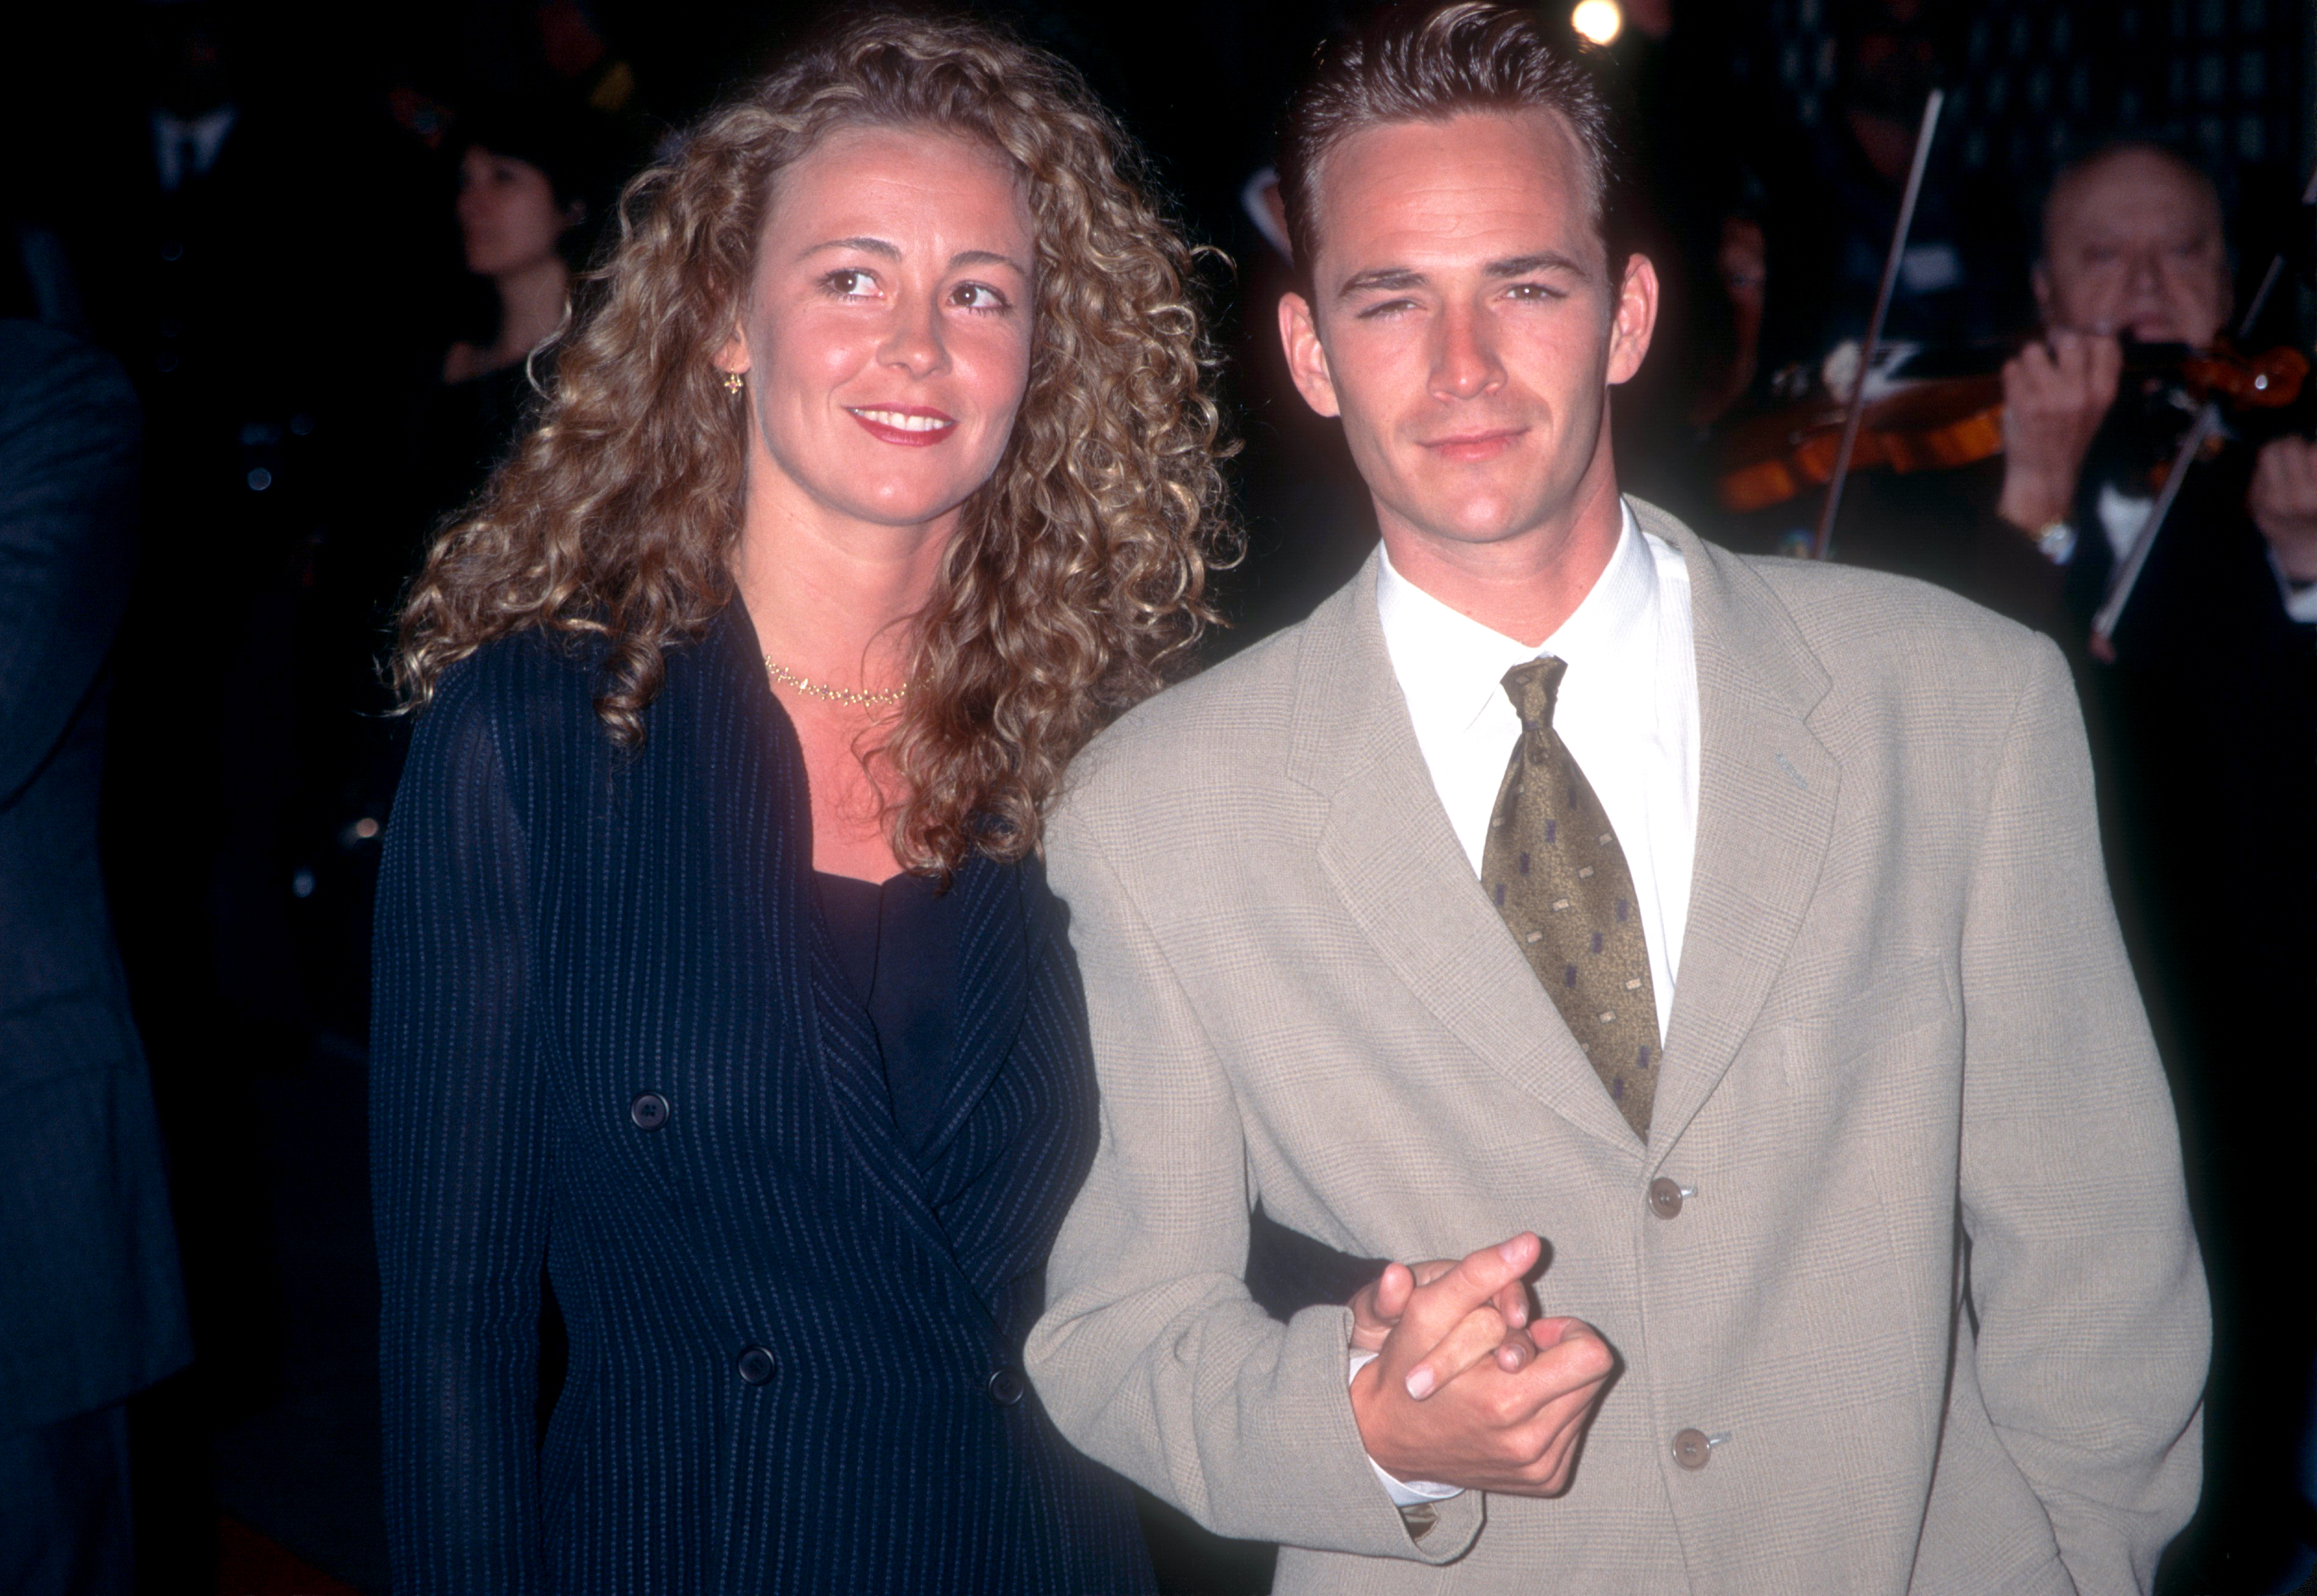 Who Was Luke Perry's Family? He Had 2 Kids and an ExWife